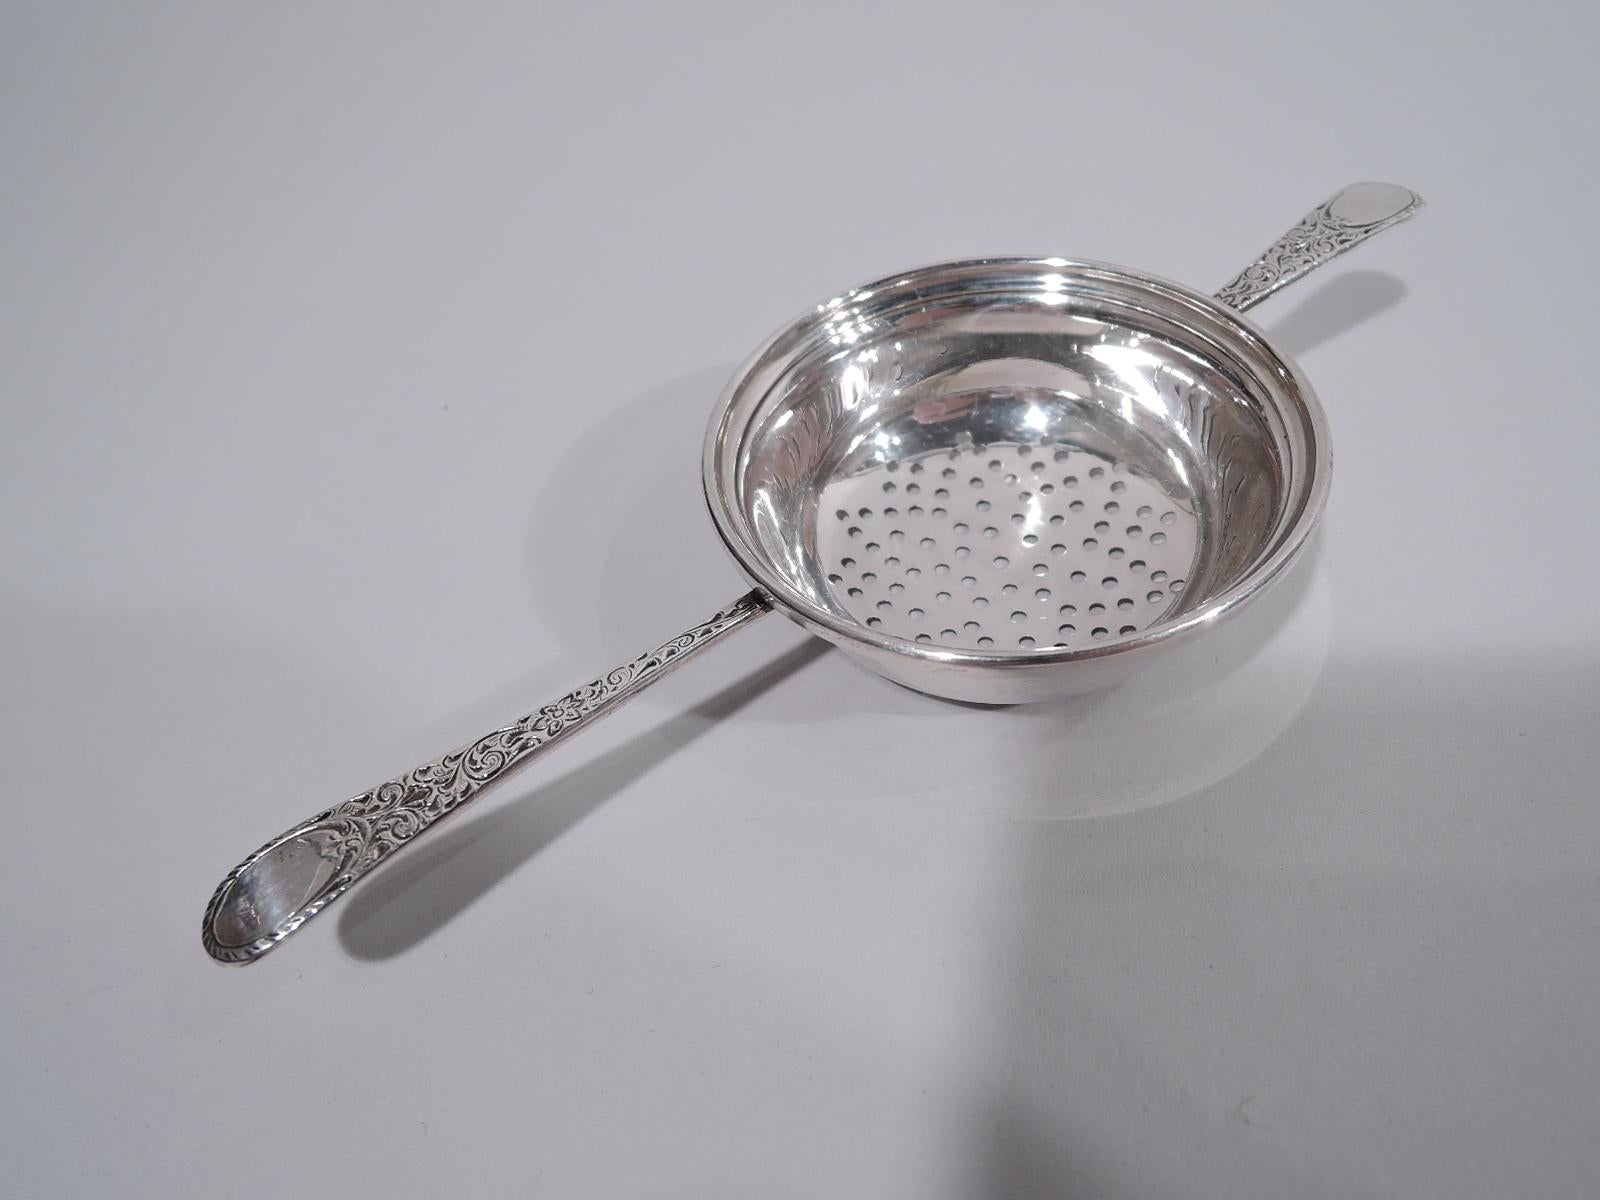 Edwardian sterling silver tea strainer. Made by Birks in Canada, ca 1920. Round bowl with pierced-star bottom. Tapering handle mounted to one side; shorter same mounted to other. Supports have pretty scrollwork and oval terminals (vacant). Majorly